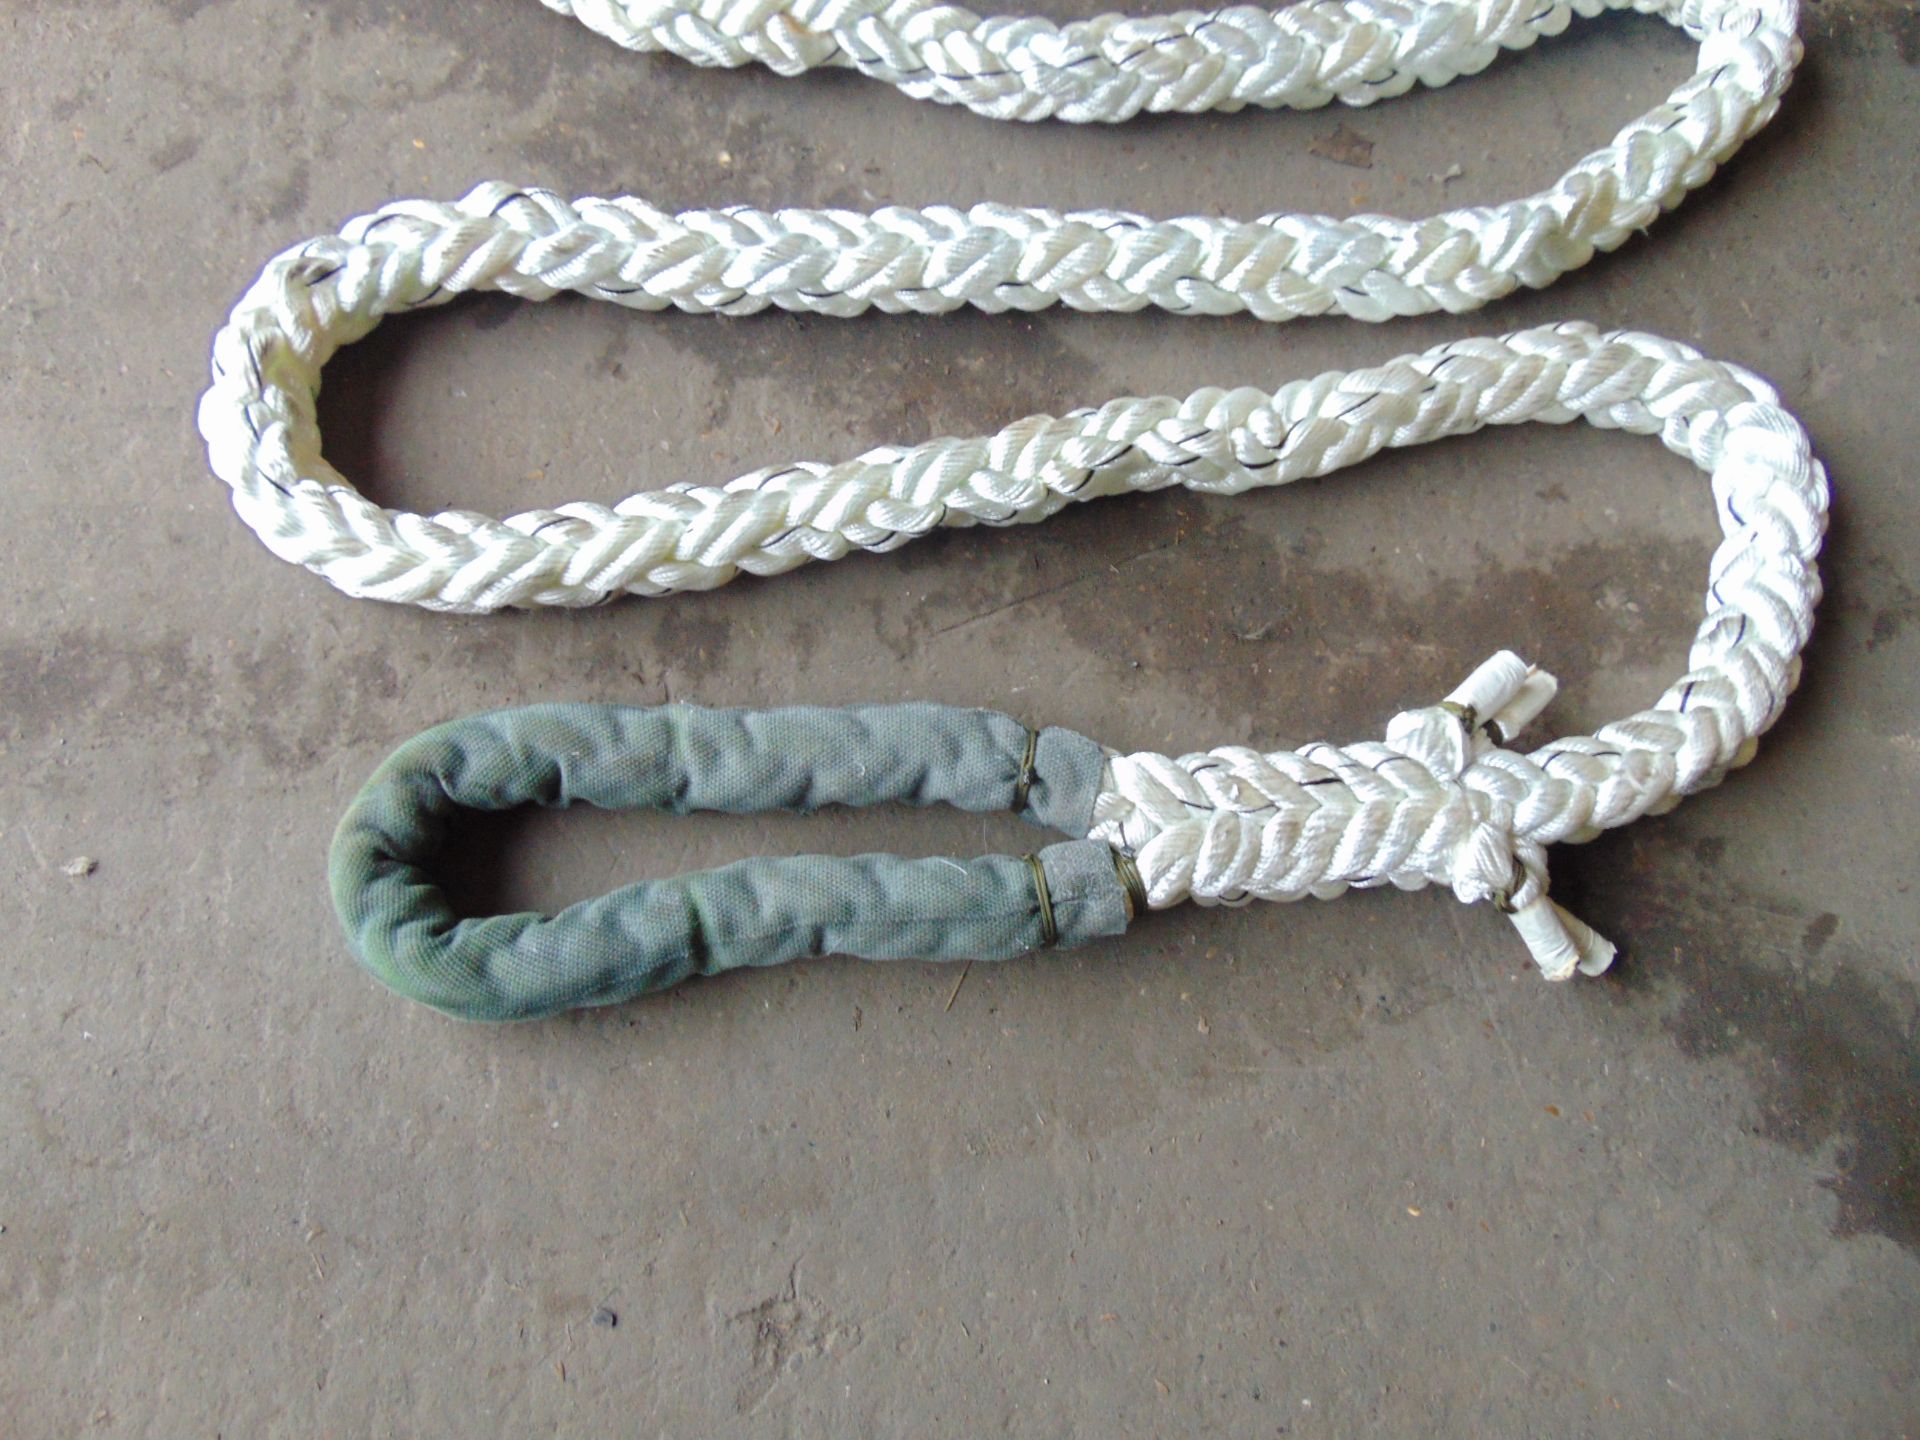 New Unissued Marlow Recovery Rope 13M Long - Image 4 of 4